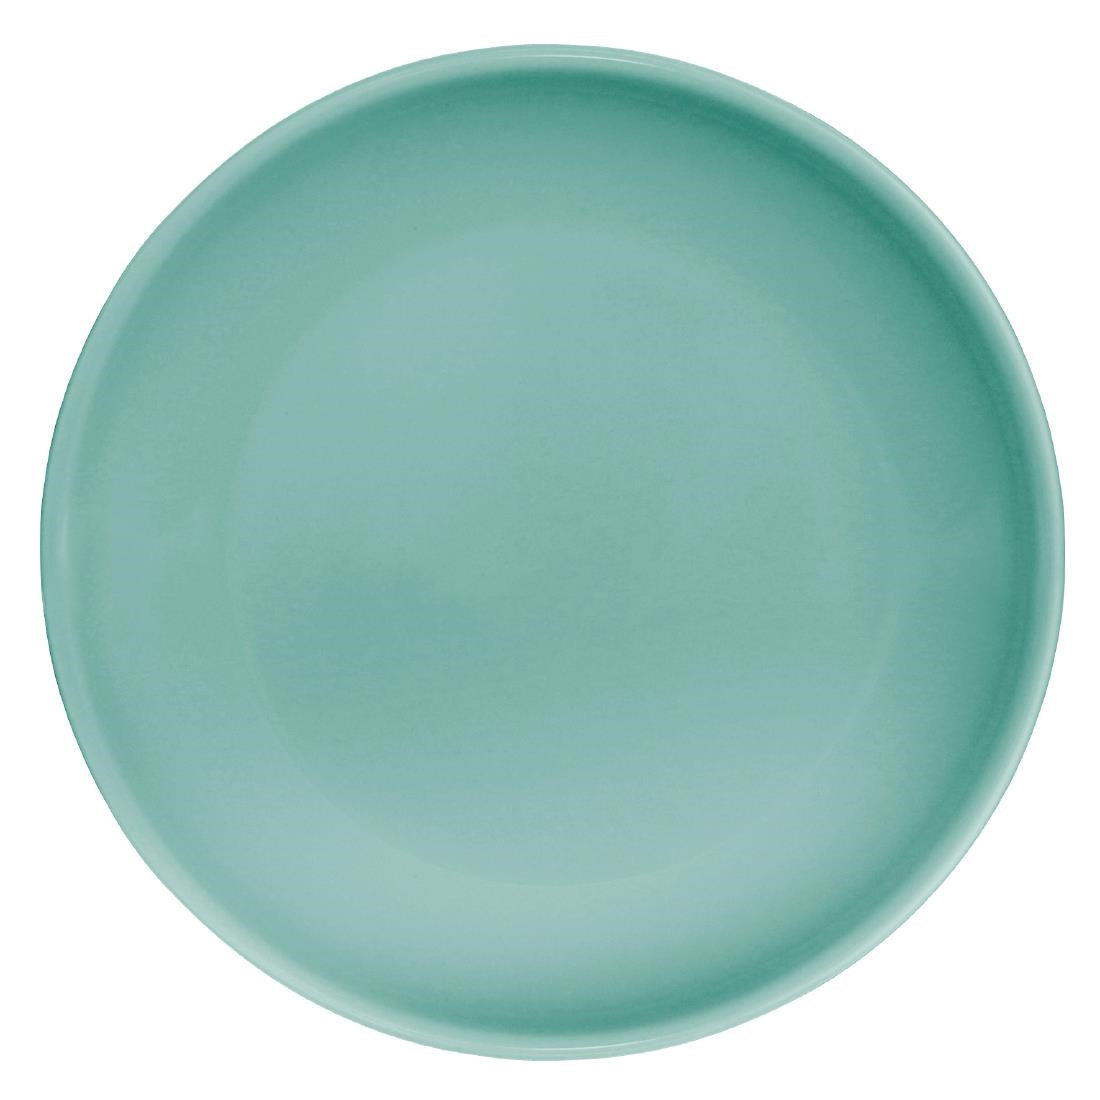 CG355 Olympia Cafe Coupe Plate Aqua 205mm (Pack of 12)